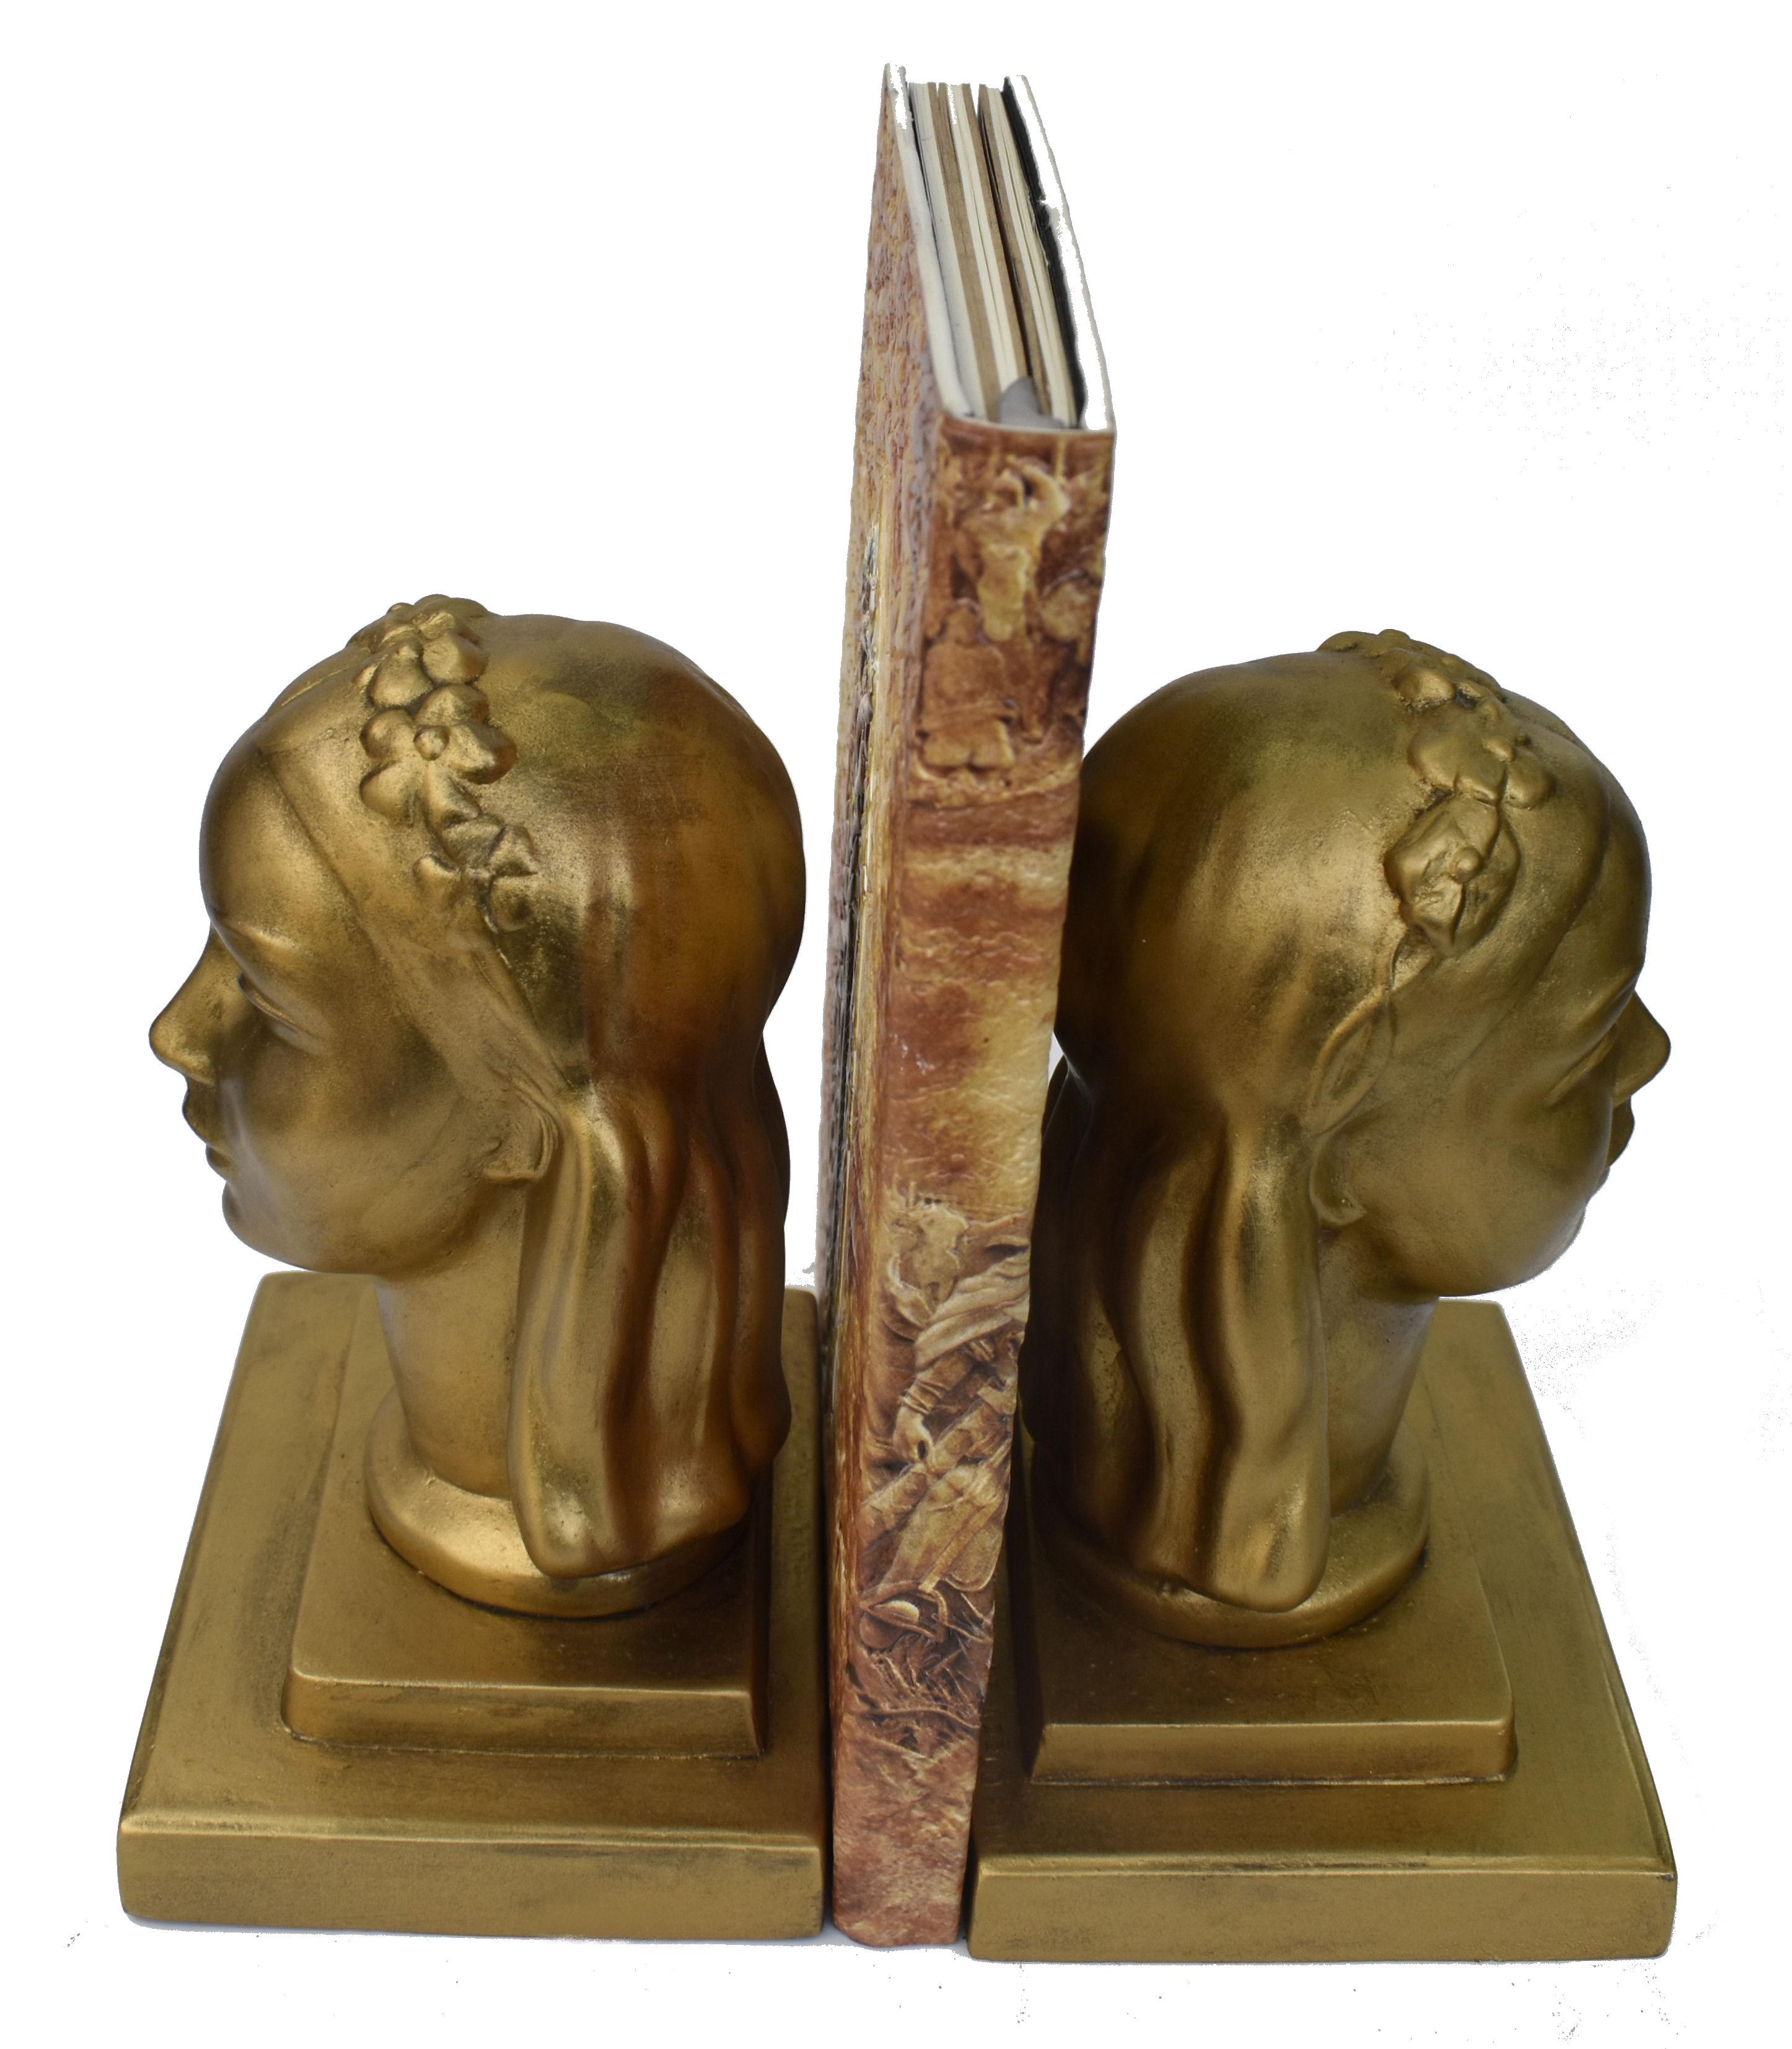 Metal Art Deco Female Bust Bookends by Frankart Inc, c1930